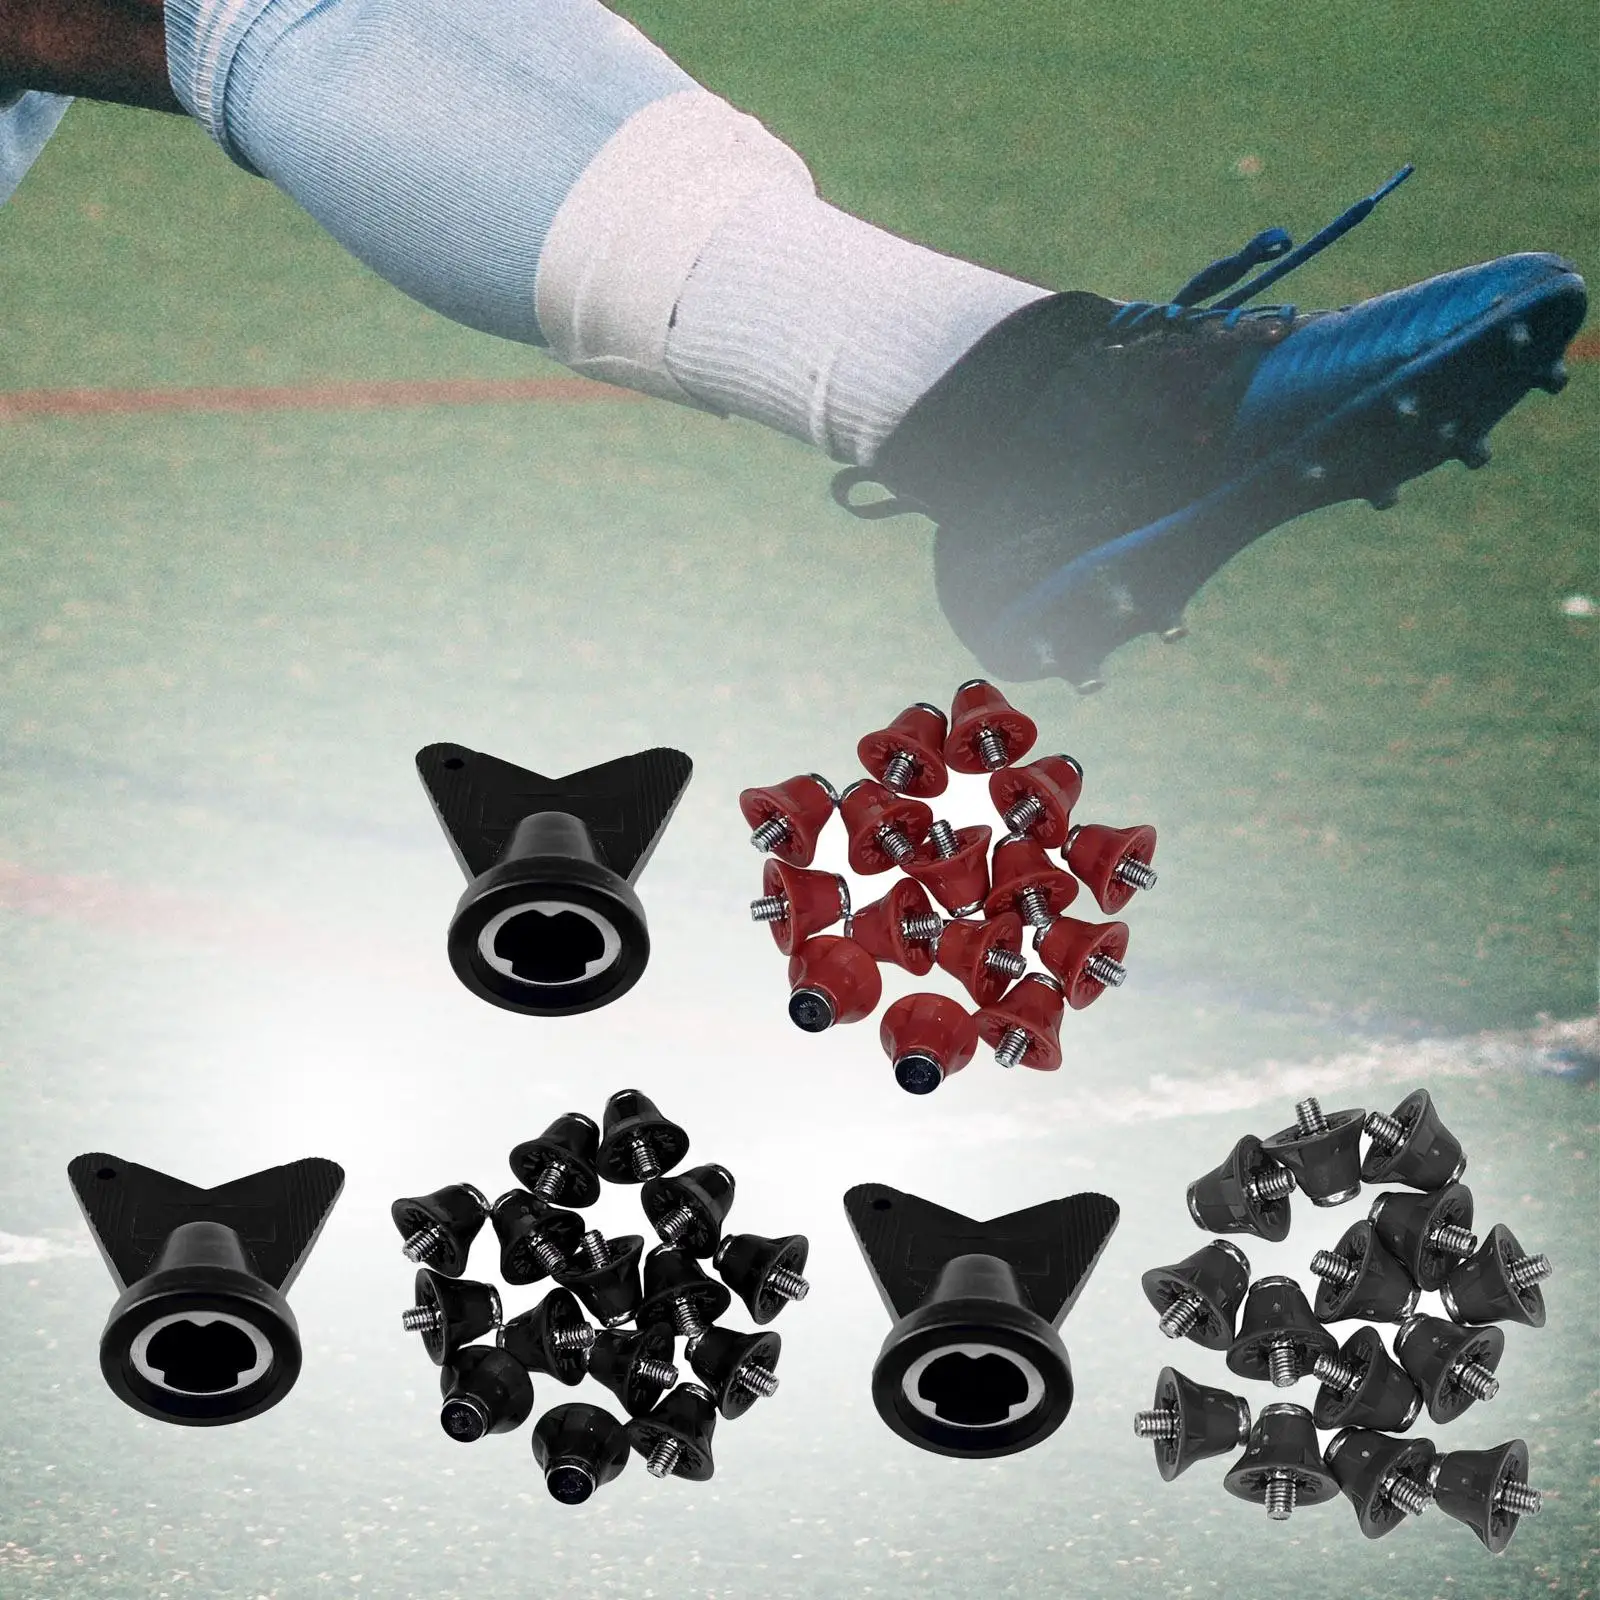 12Pcs Football Boot Studs Universal Turf M5 Soccer Boot Cleats for Competition Training Indoor Outdoor Sports Athletic Sneakers